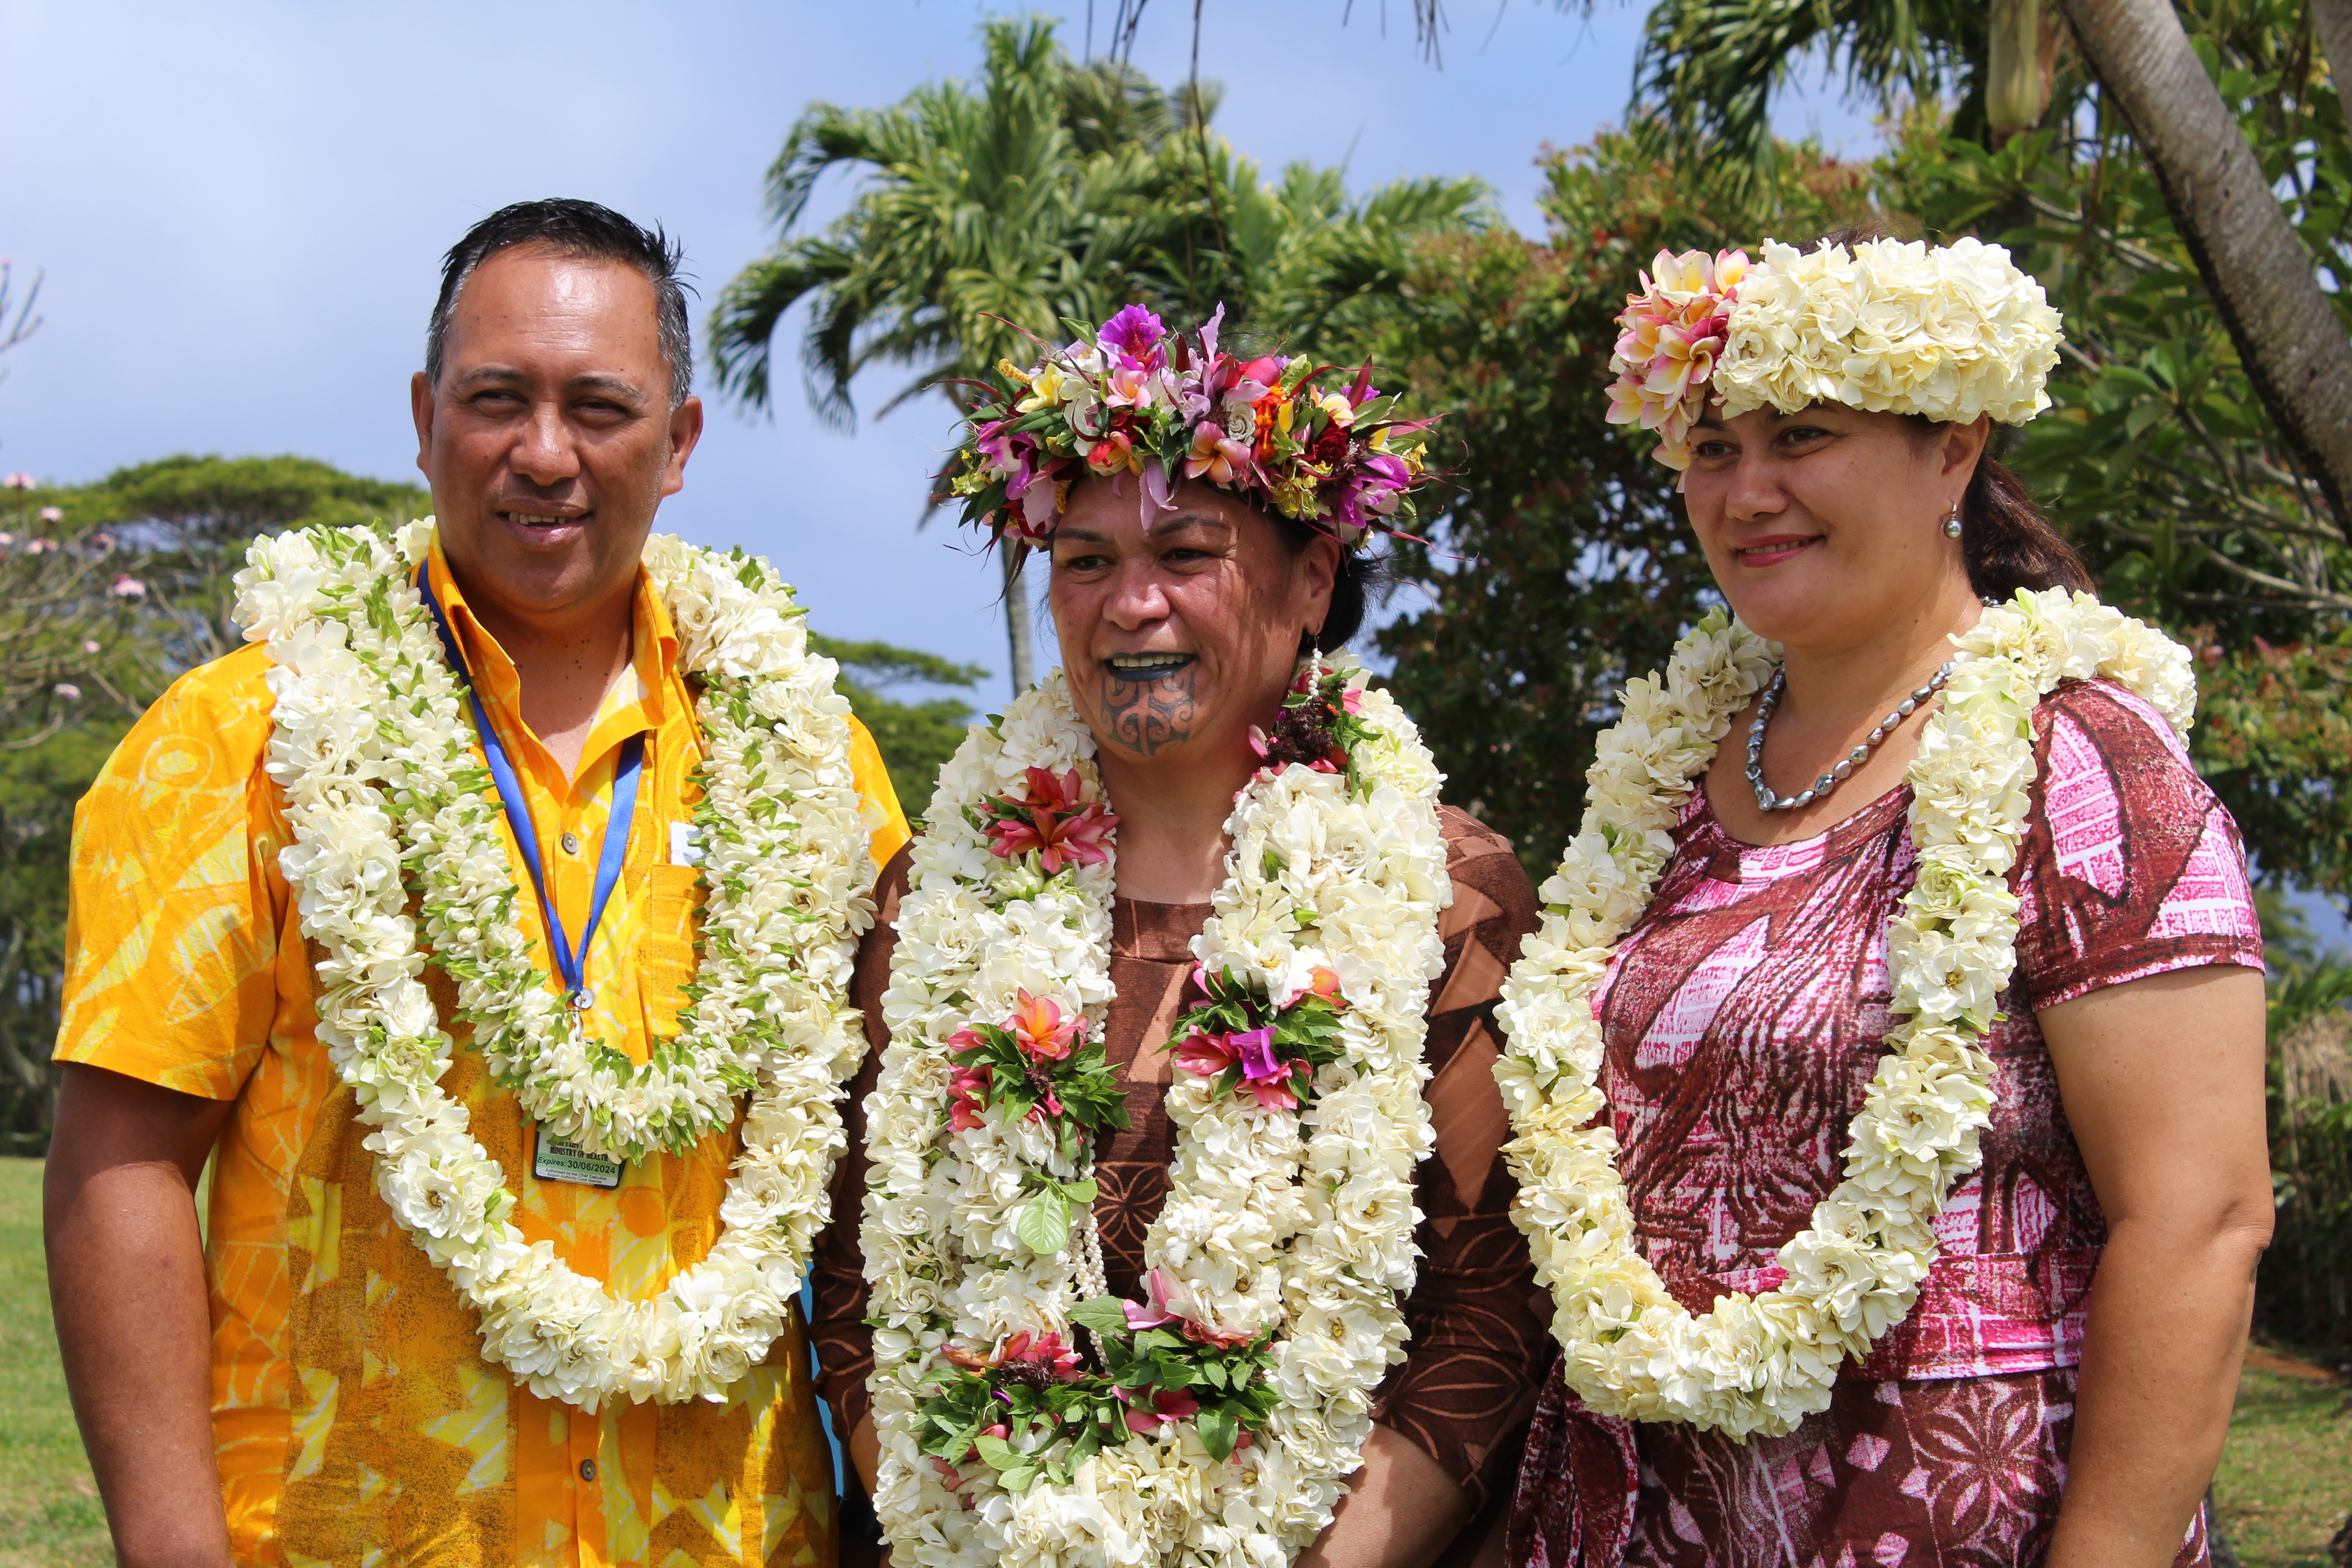 Cook Islands Welcomes Climate Resilience, Pandemic Response and PIF Support